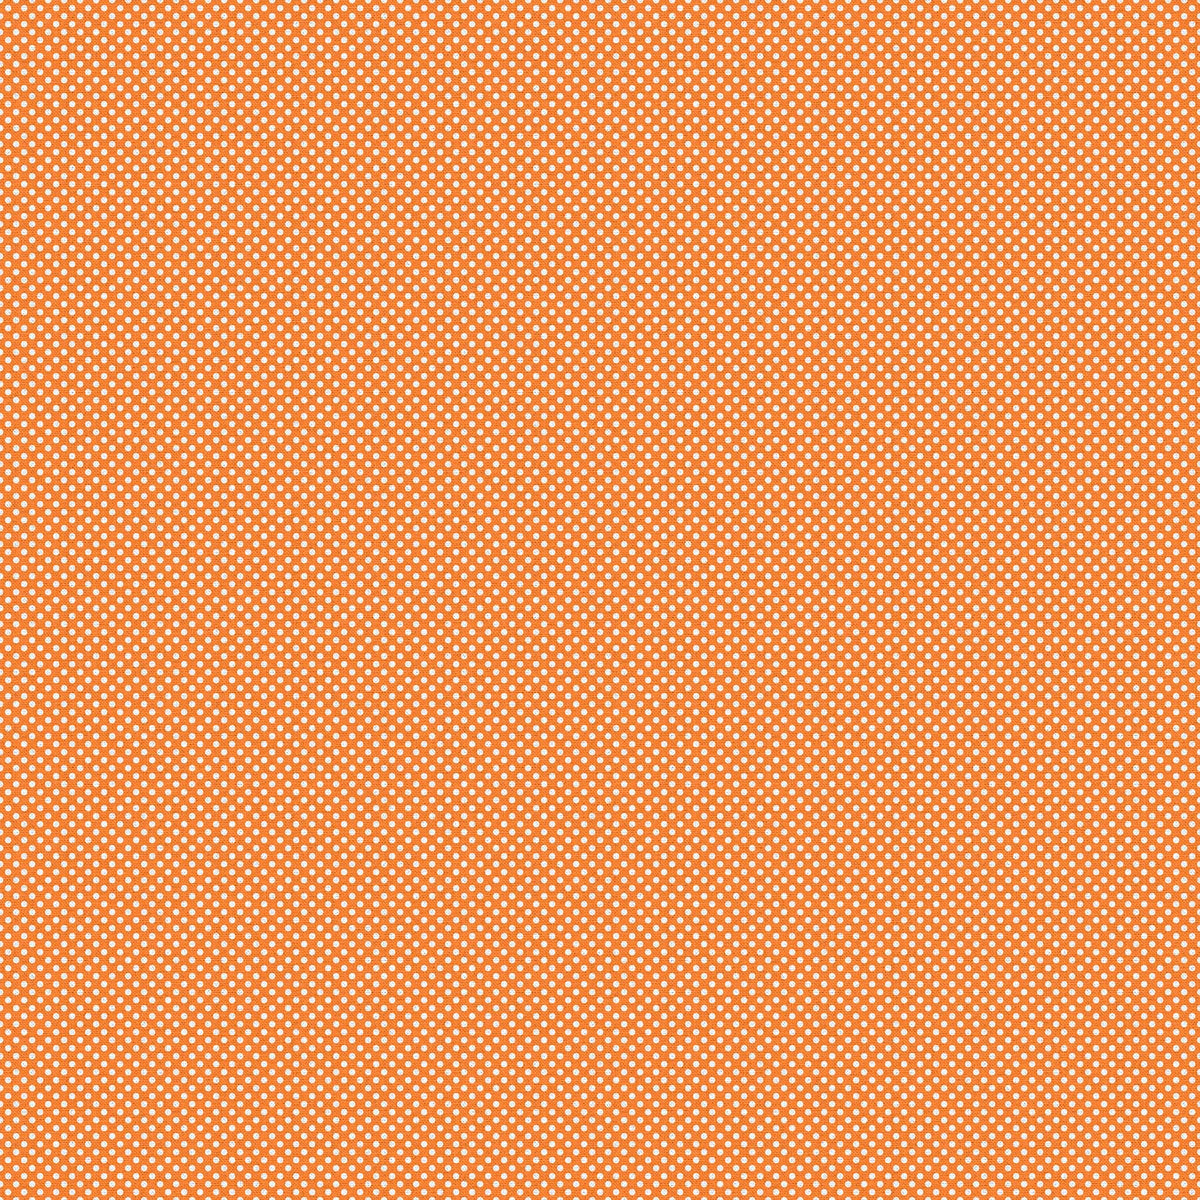 I've Got a Notion Quilt Fabric - Dots in White on Orange - 24544-56